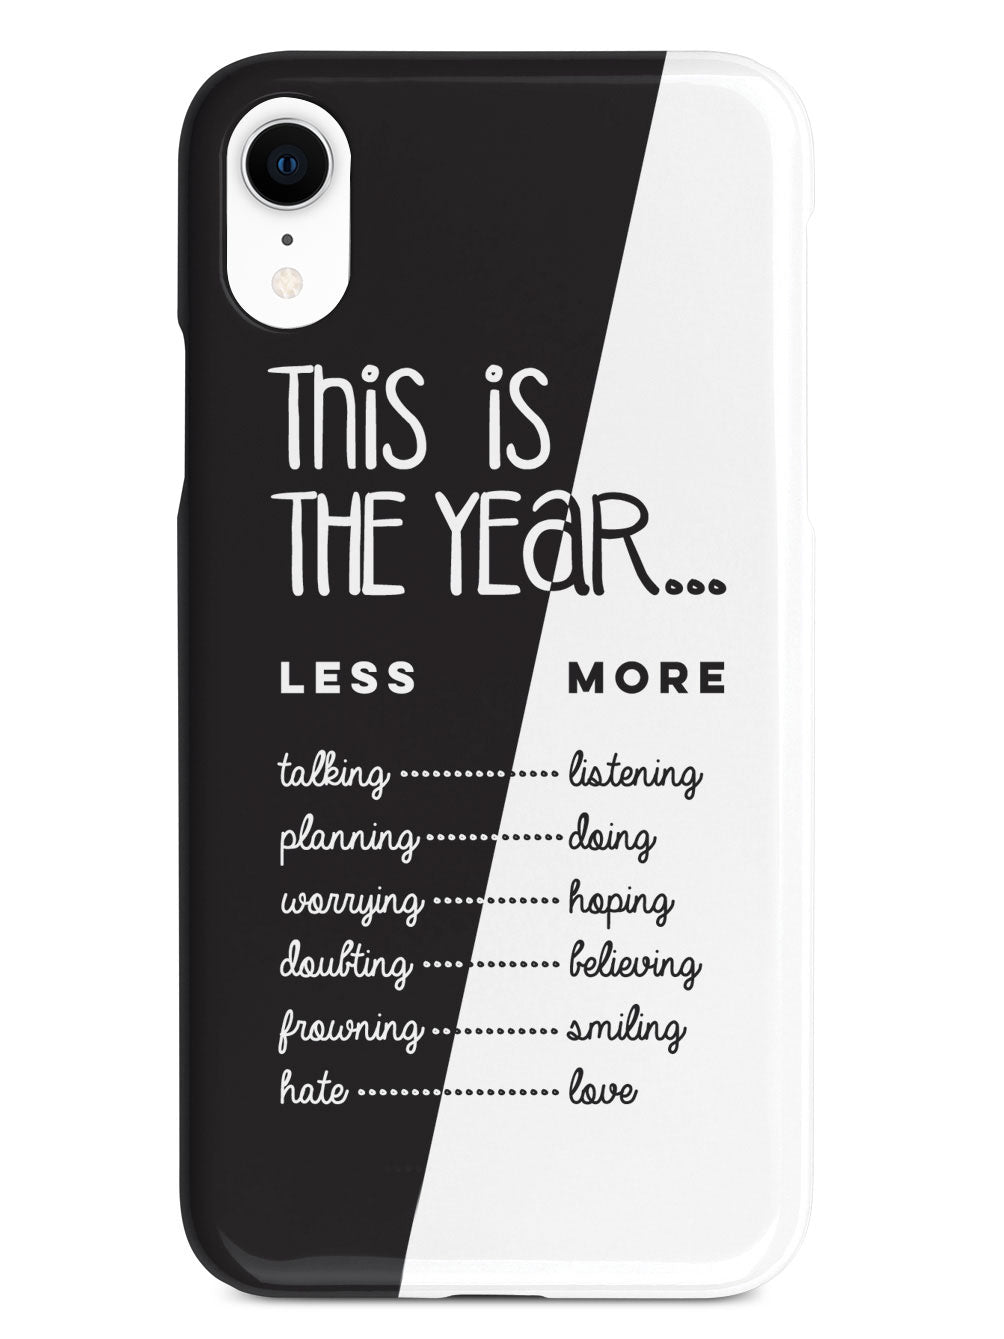 This is The Year - Goals, New Years Resolution Case